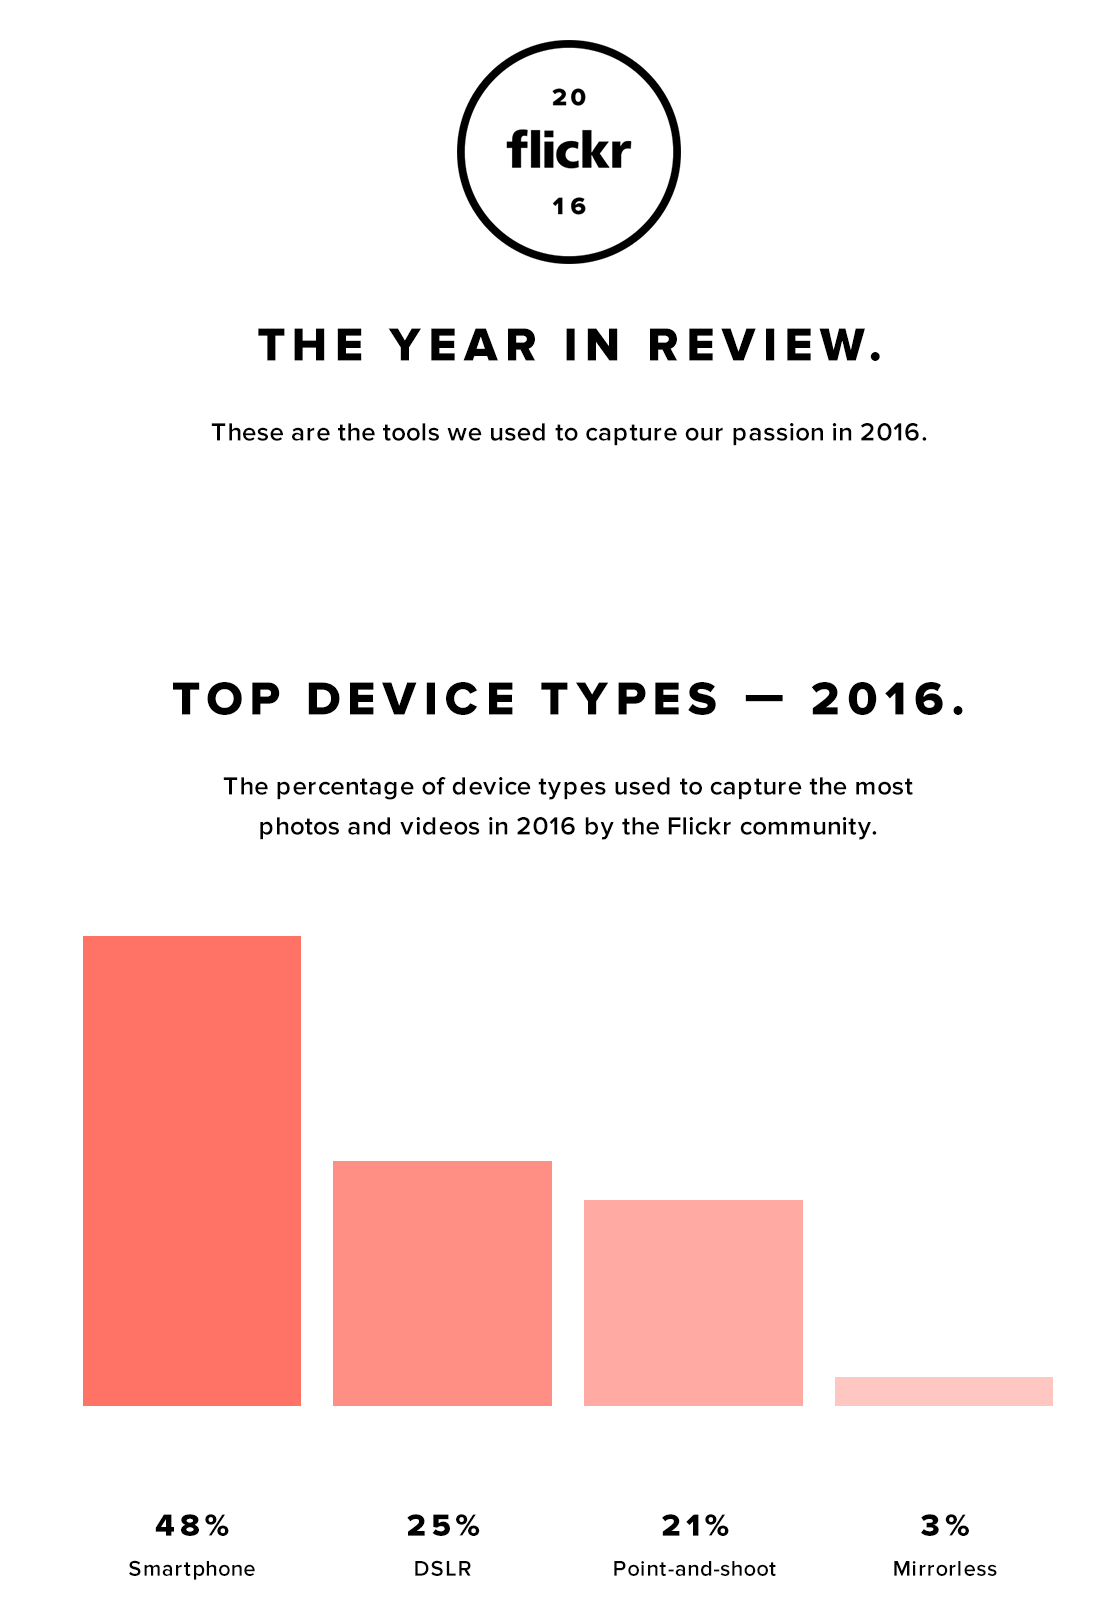 iphone account for 8 of top 10 cameras in 2016 flickr report 02a